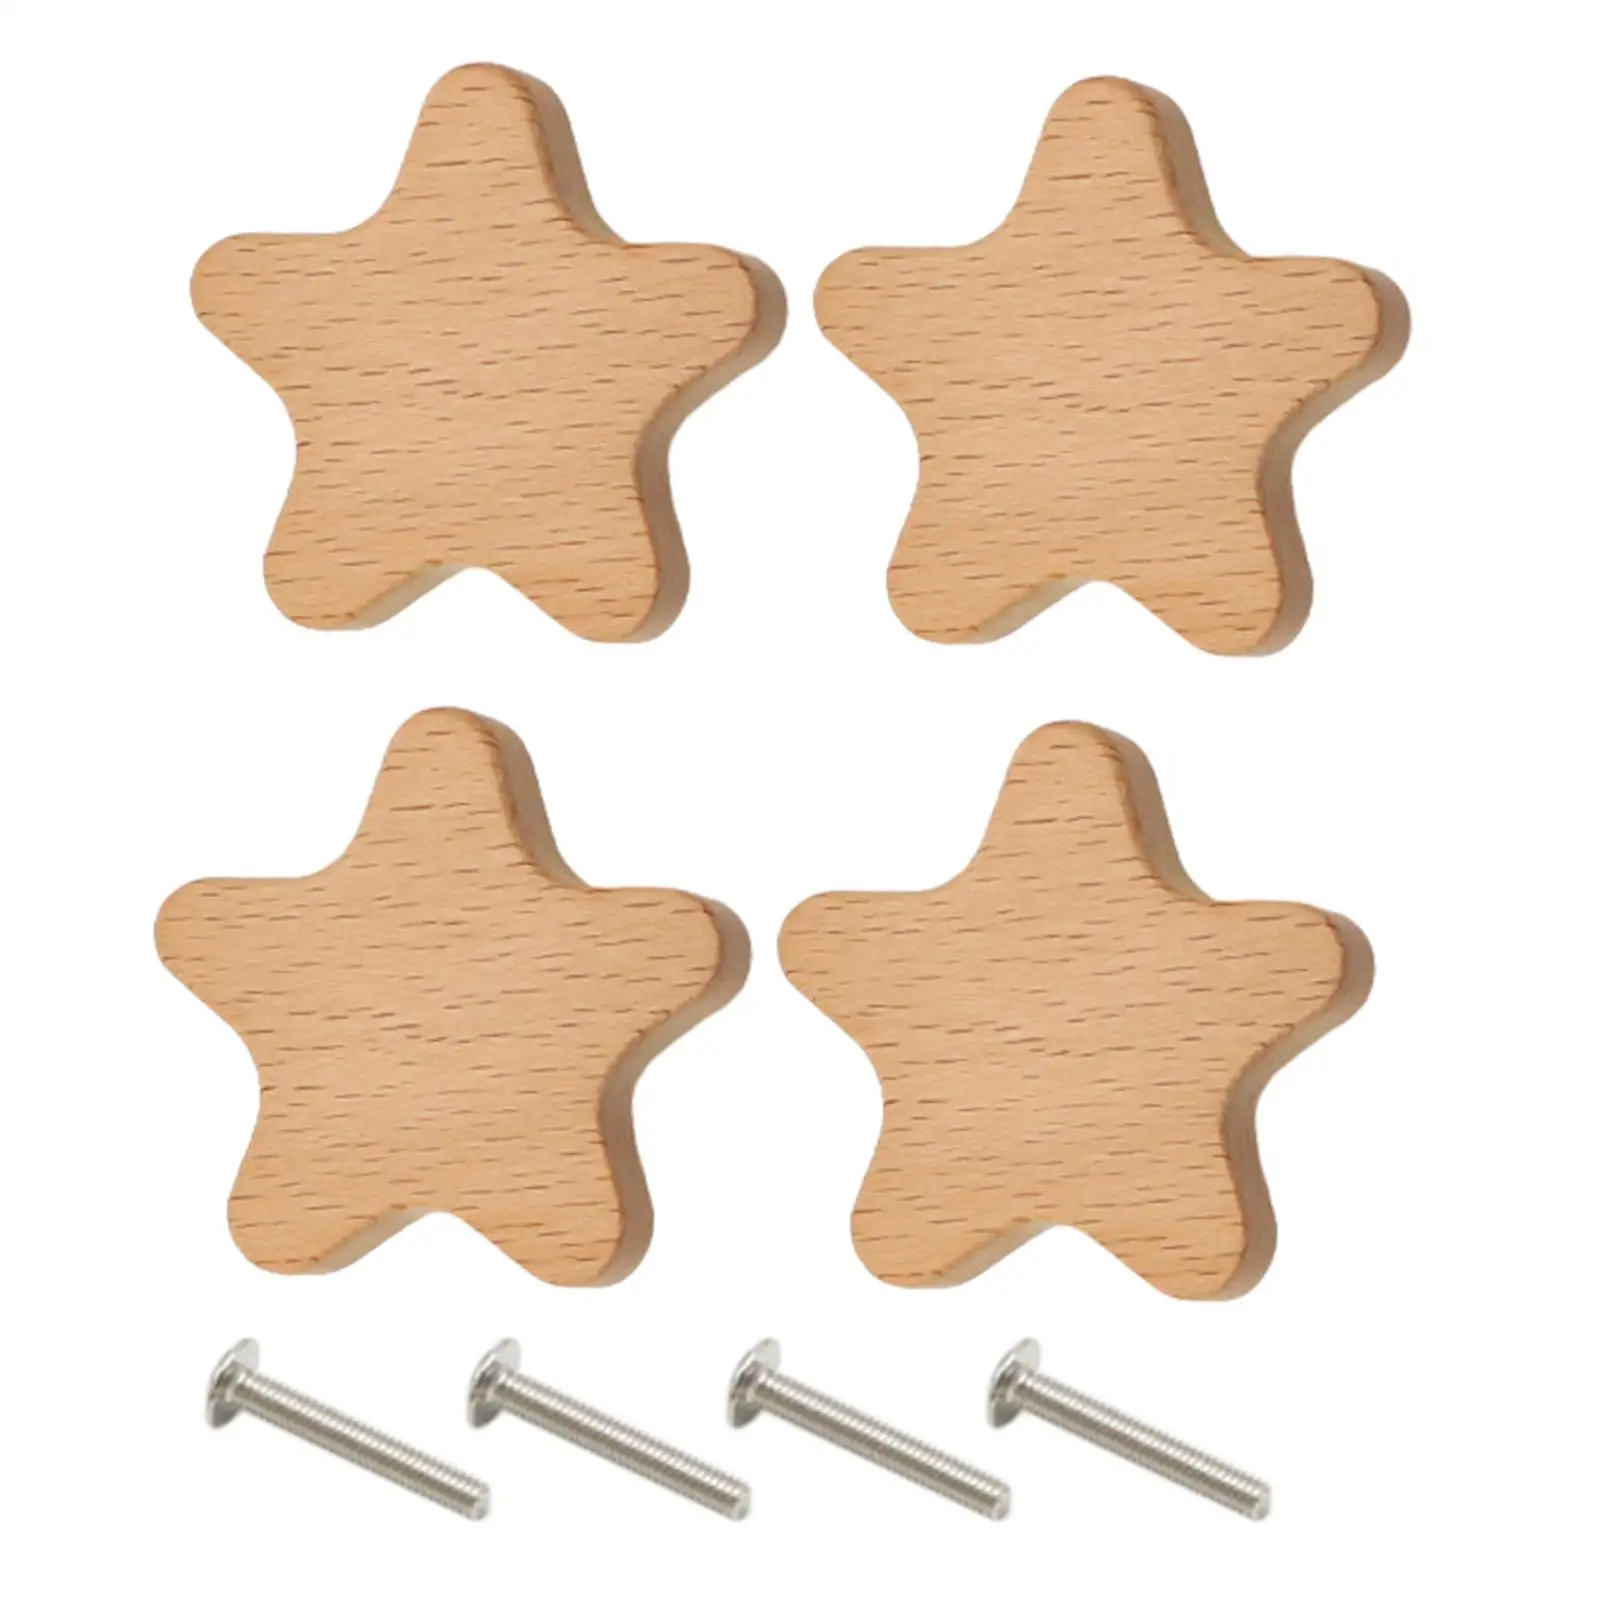 4x Wooden Cabinet Knobs Modern Wood Drawer Knobs for Cabinet Bathroom Closet